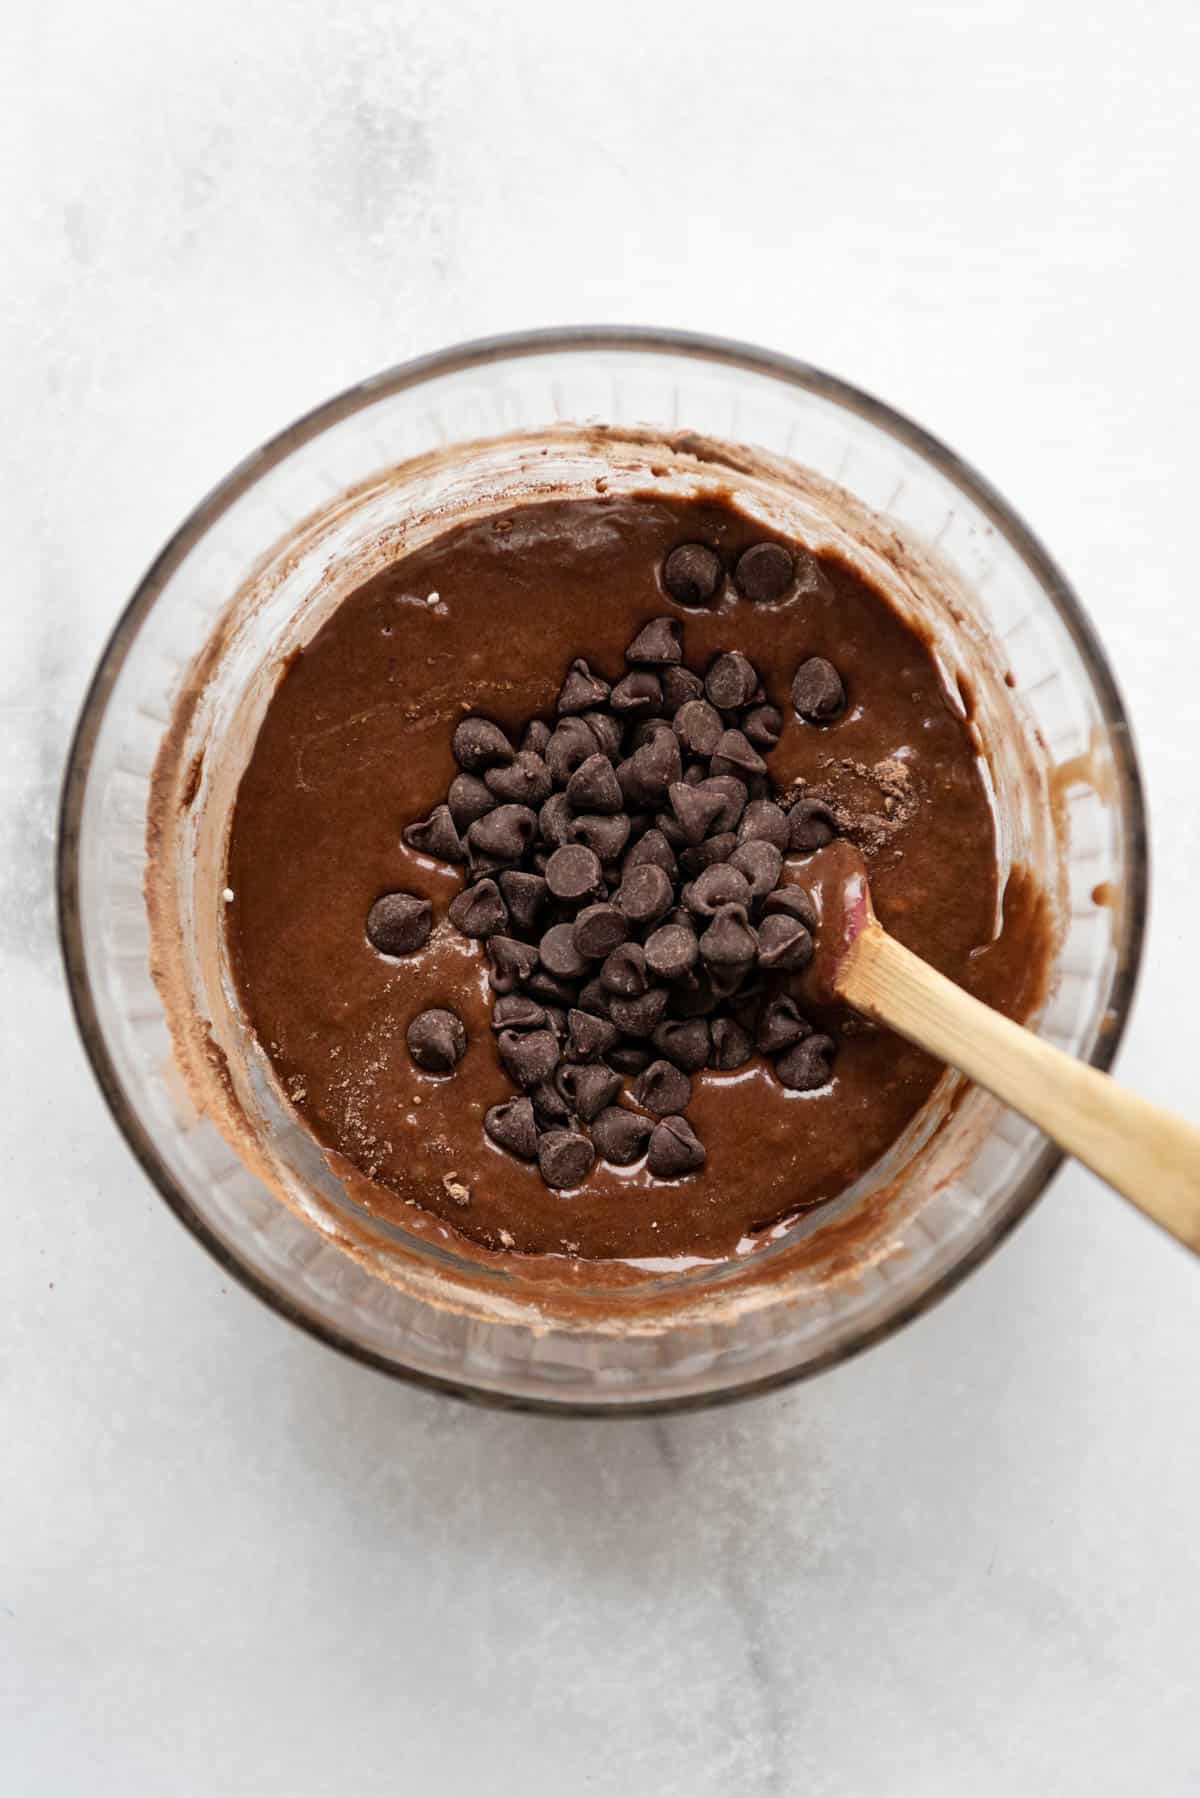 Stirring chocolate chips into brownie batter.